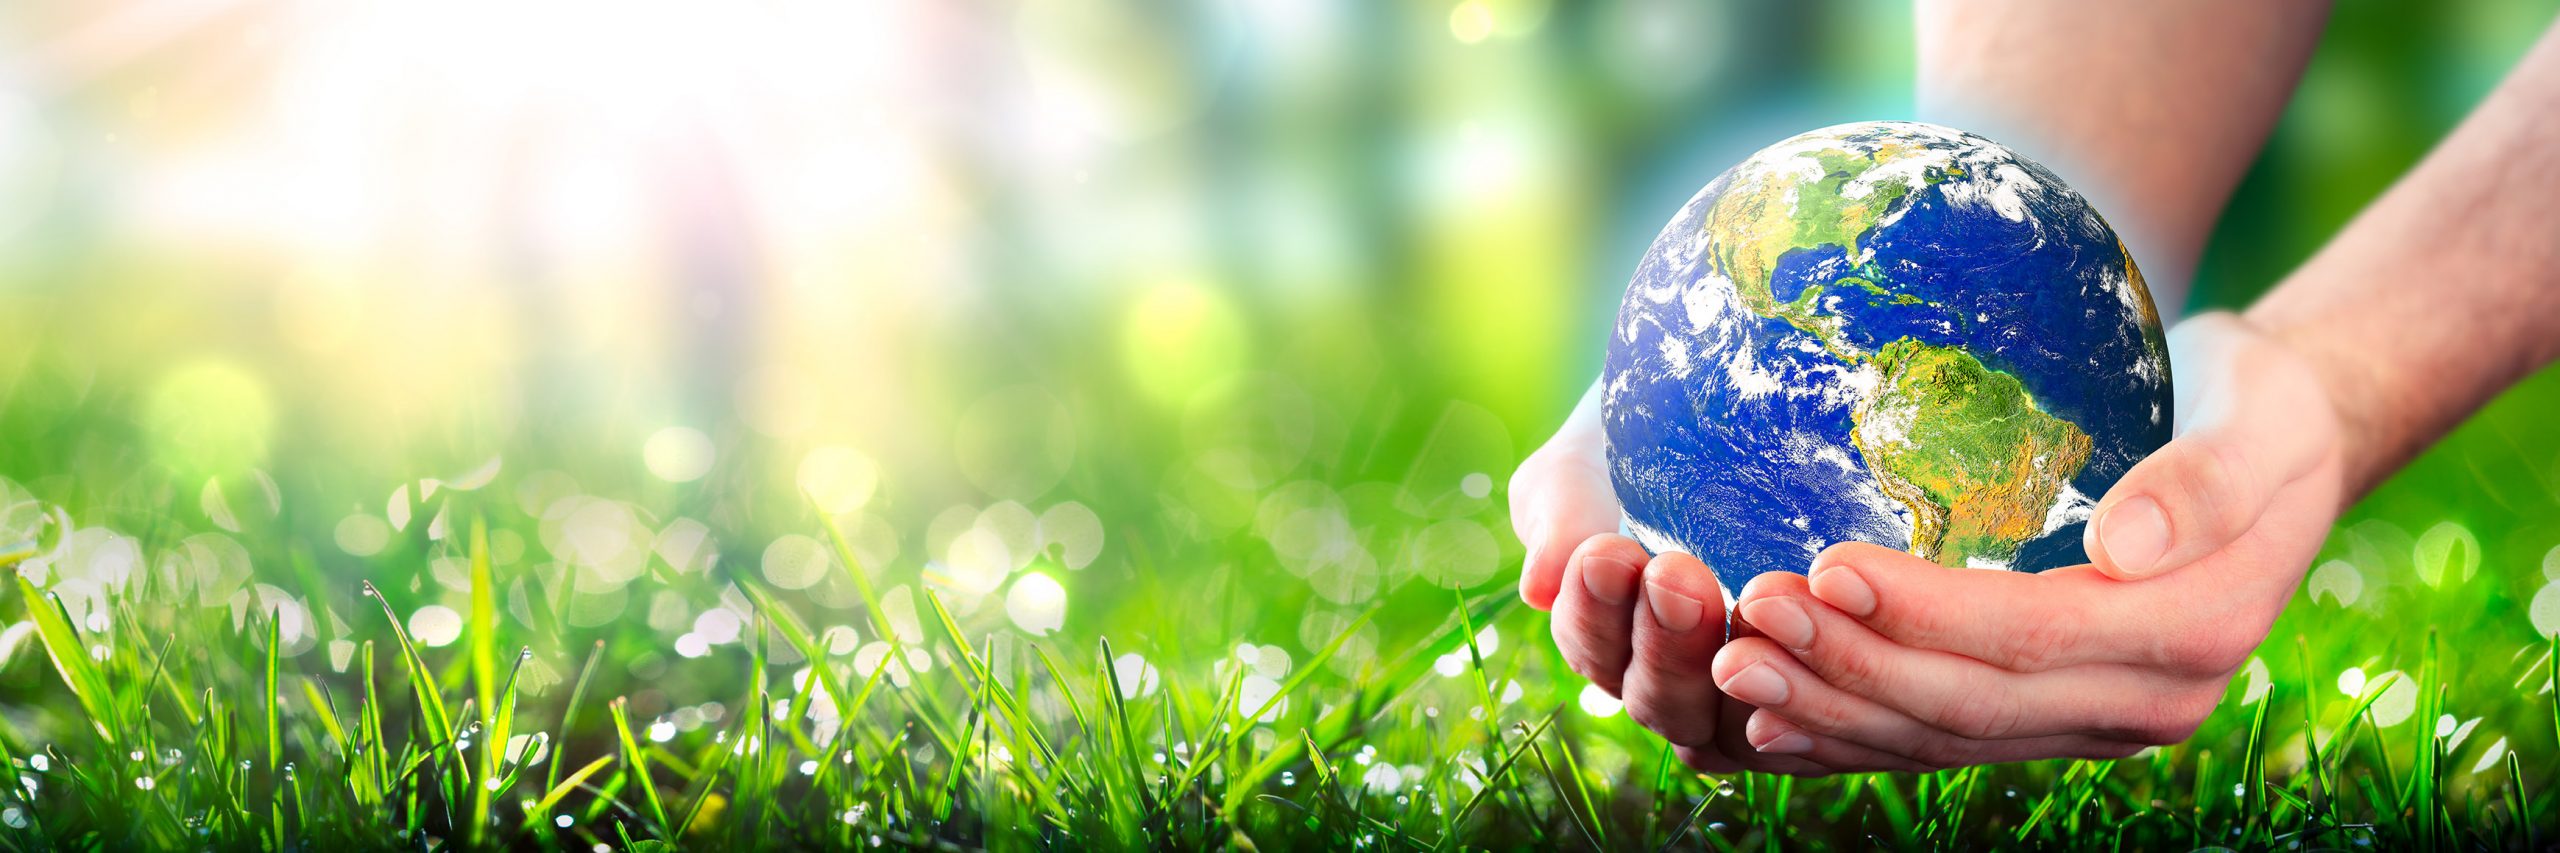 Hands Holding Planet Earth In Lush Green Environment & Sunlight